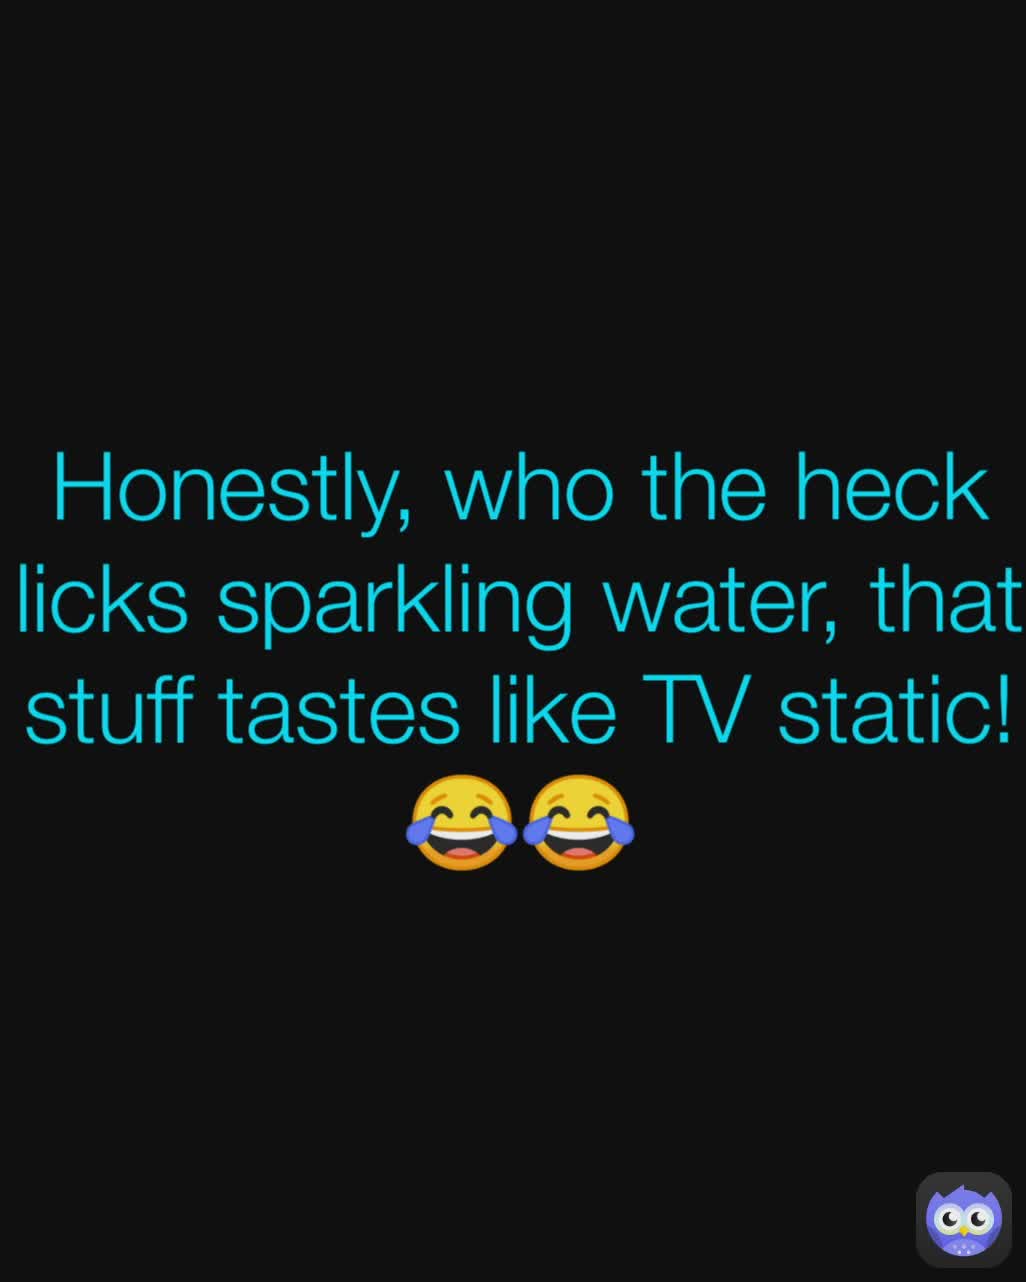 Honestly, who the heck licks sparkling water, that stuff tastes like TV static! 😂😂